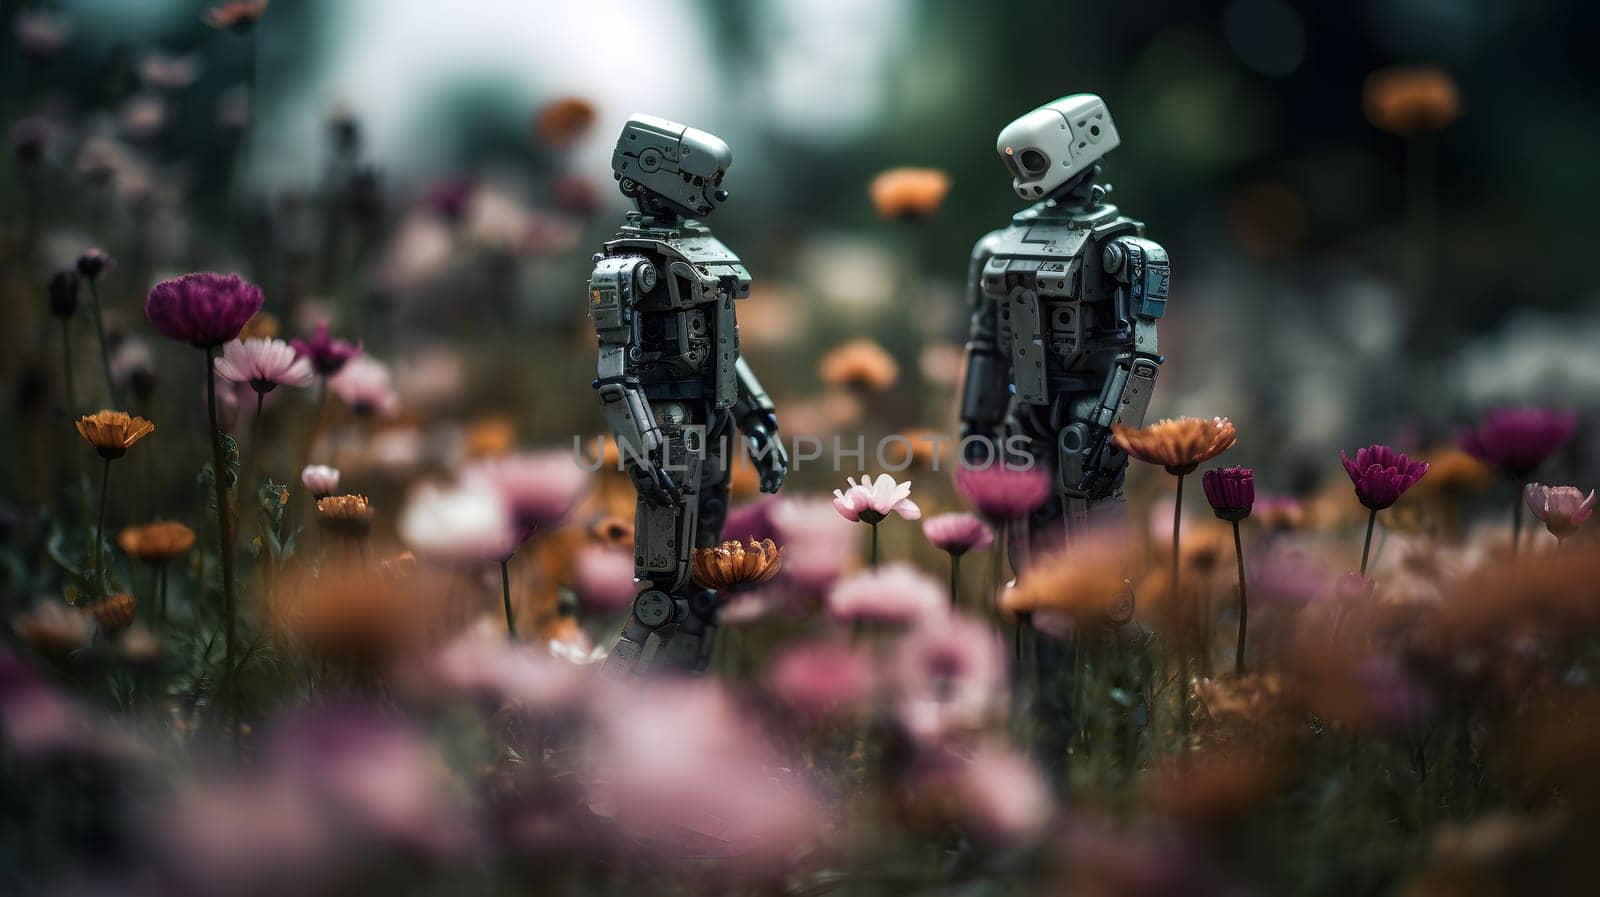 The future of androids in the style of floral surrealism, neural network generated image by z1b